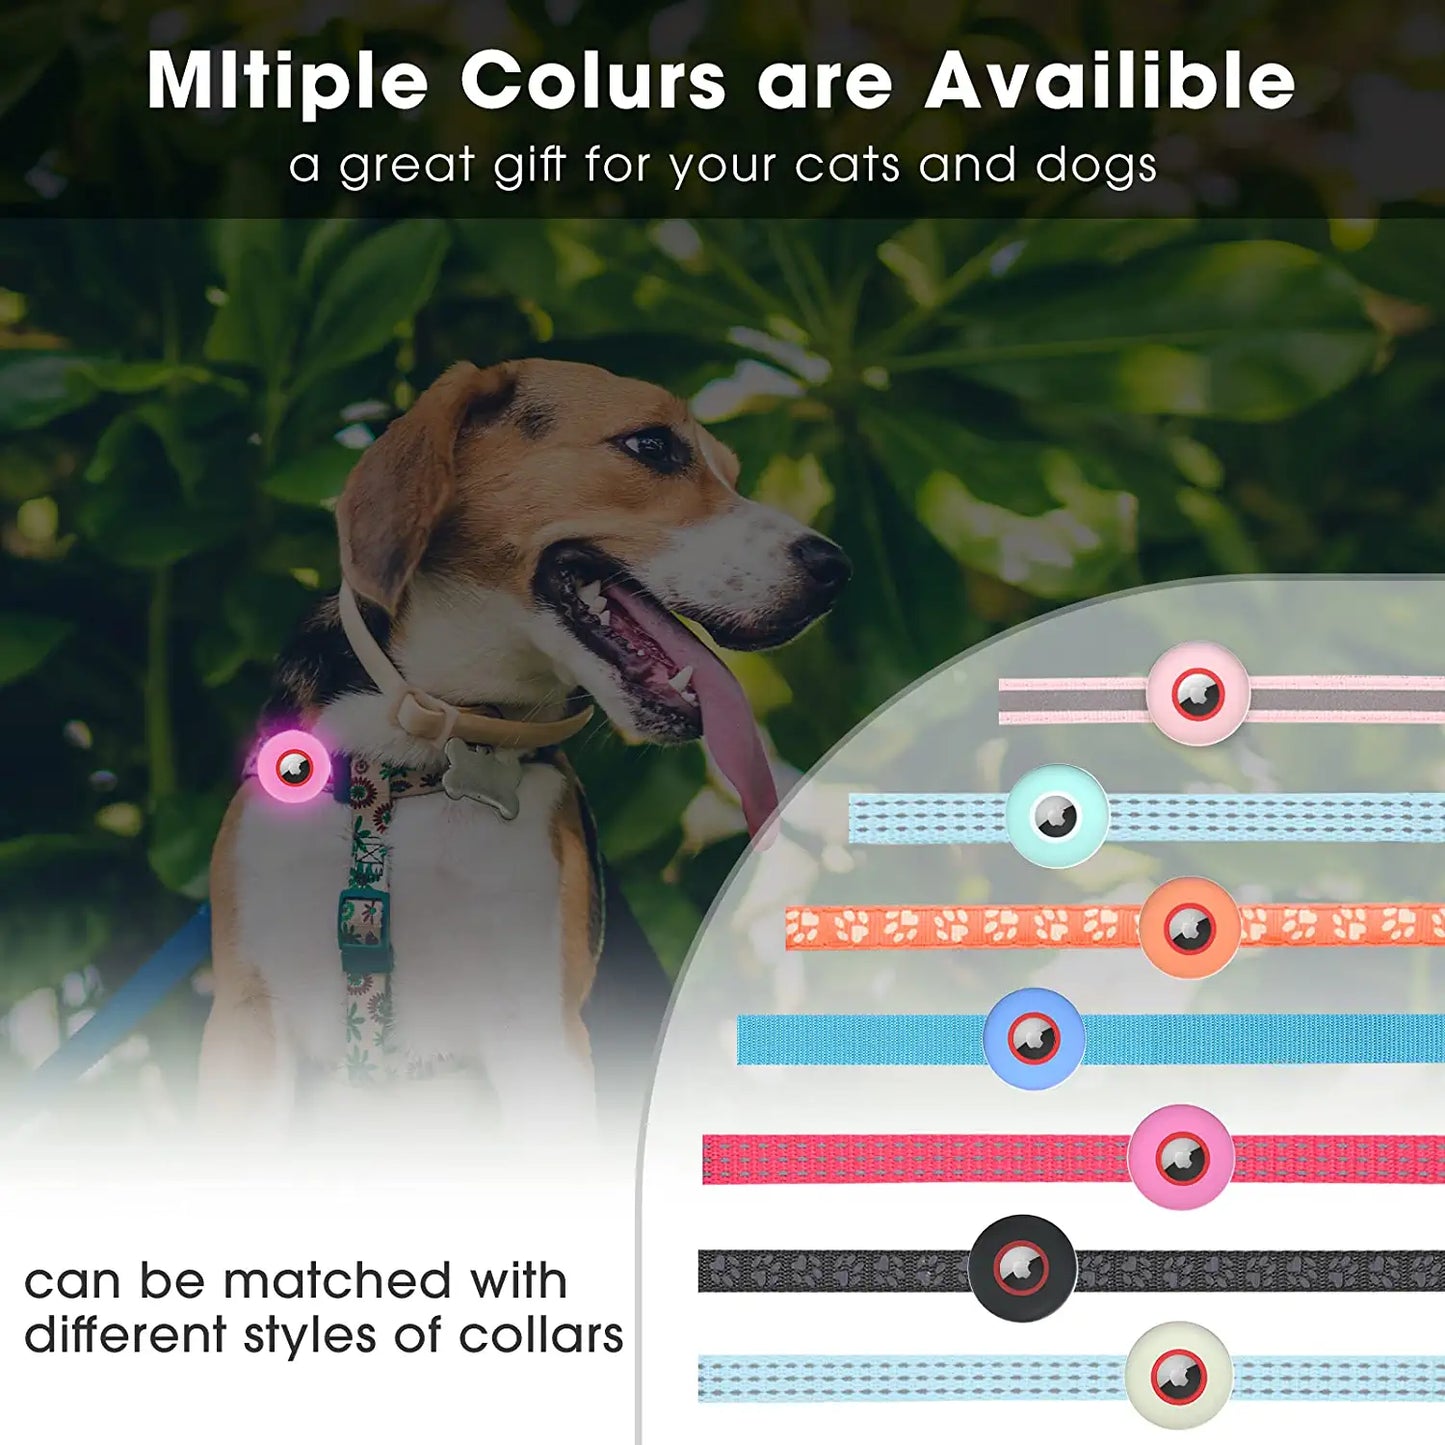 Airtag Dog Cat Collar, 2 Size (1.0 & 5/8 Inch) in One Design Fits Large Medium Small Pet Collars, Slide on Air Tag Protective Case Cover Compatible with Apple Airtag GPS Bluetooth Tracker (2 Luminous)